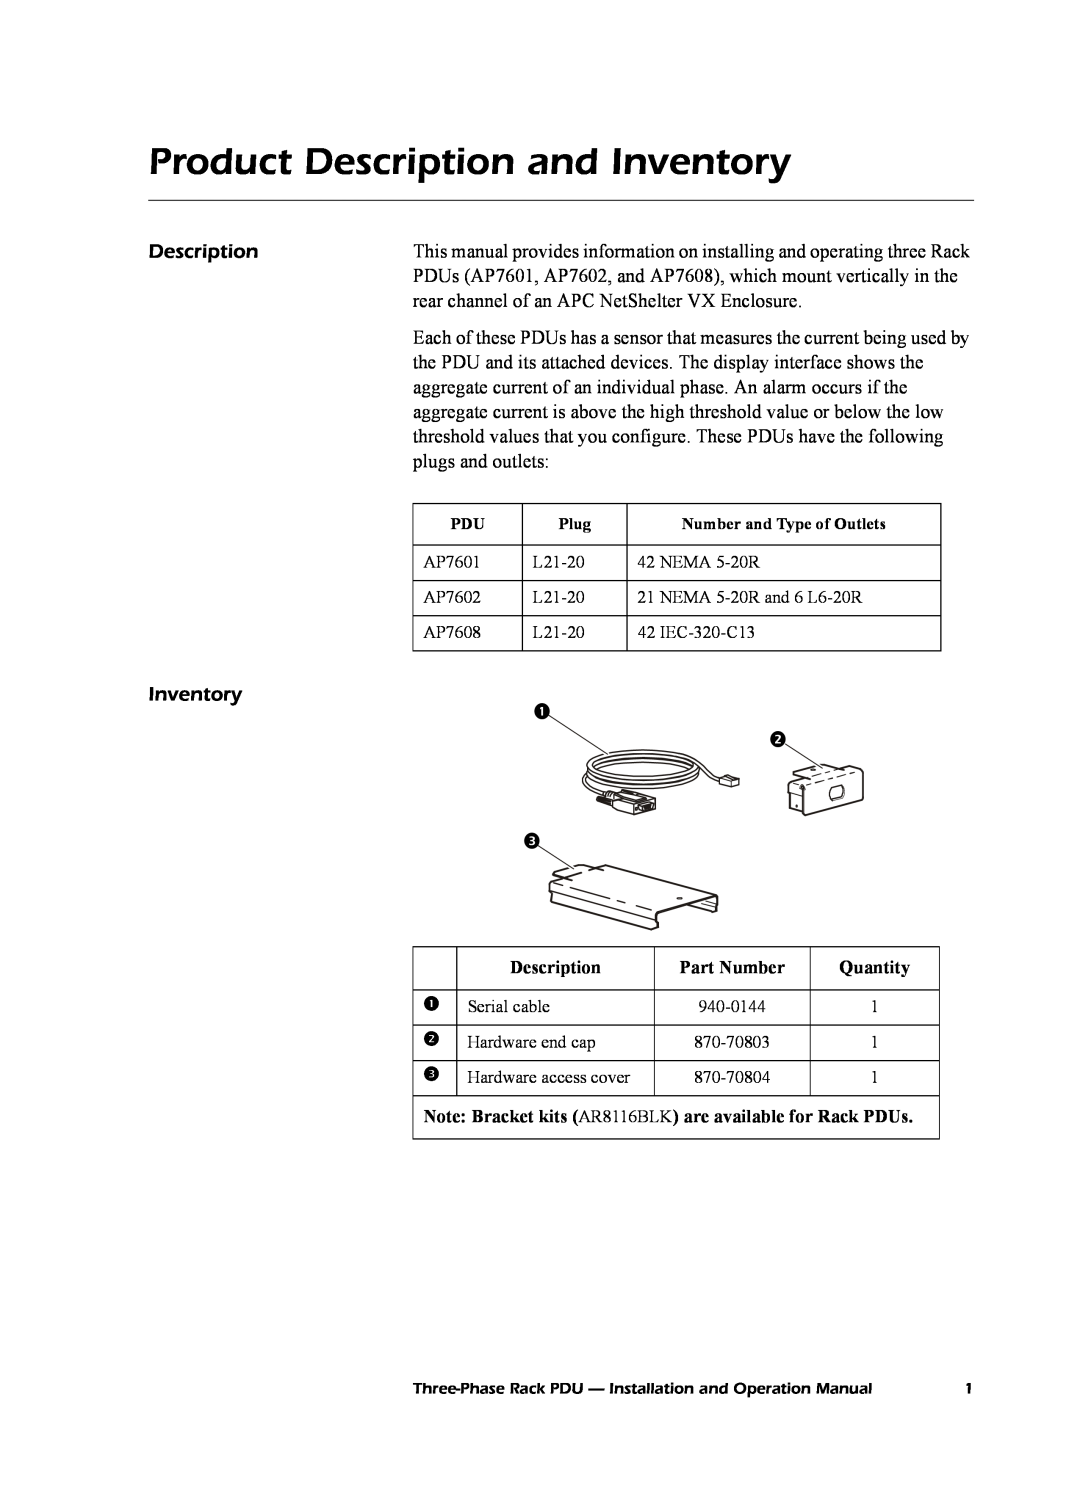 American Power Conversion AP7601, AP7608, AP7602 operation manual Product Description and Inventory 